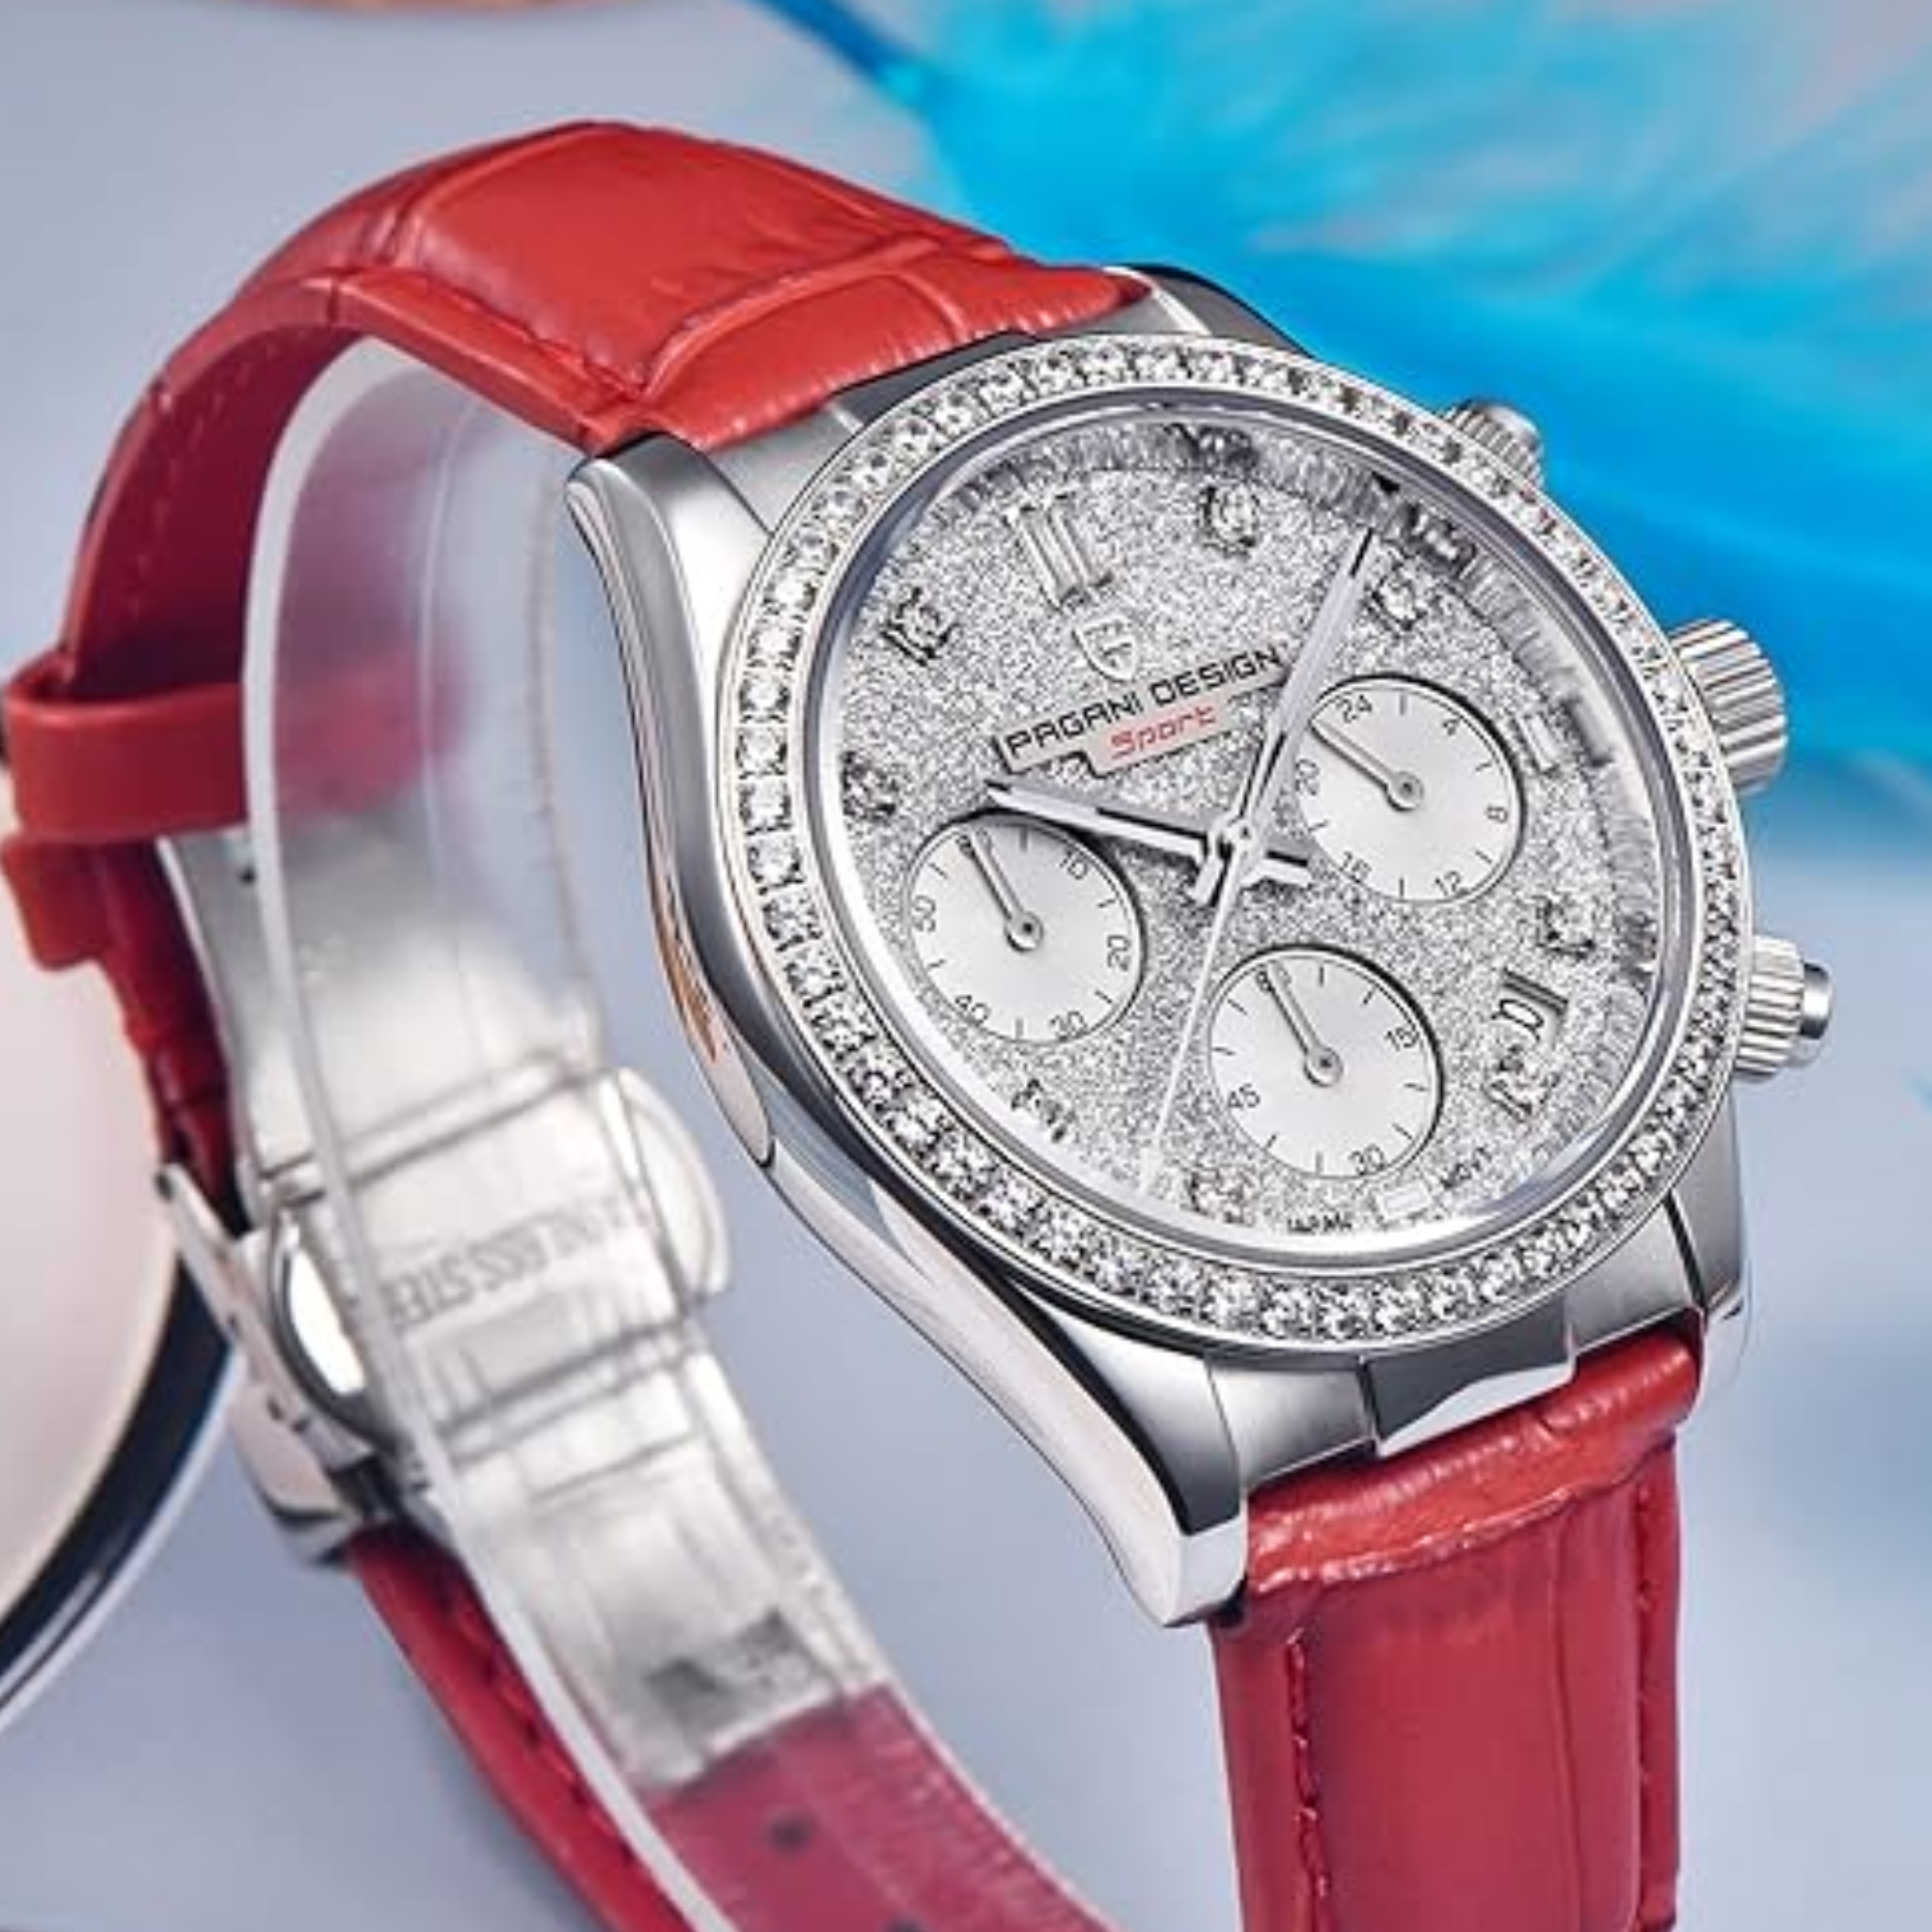 Pagani Design PD1730 Chronograph Date Quartz women's Watch  - White Dial with Red Strap